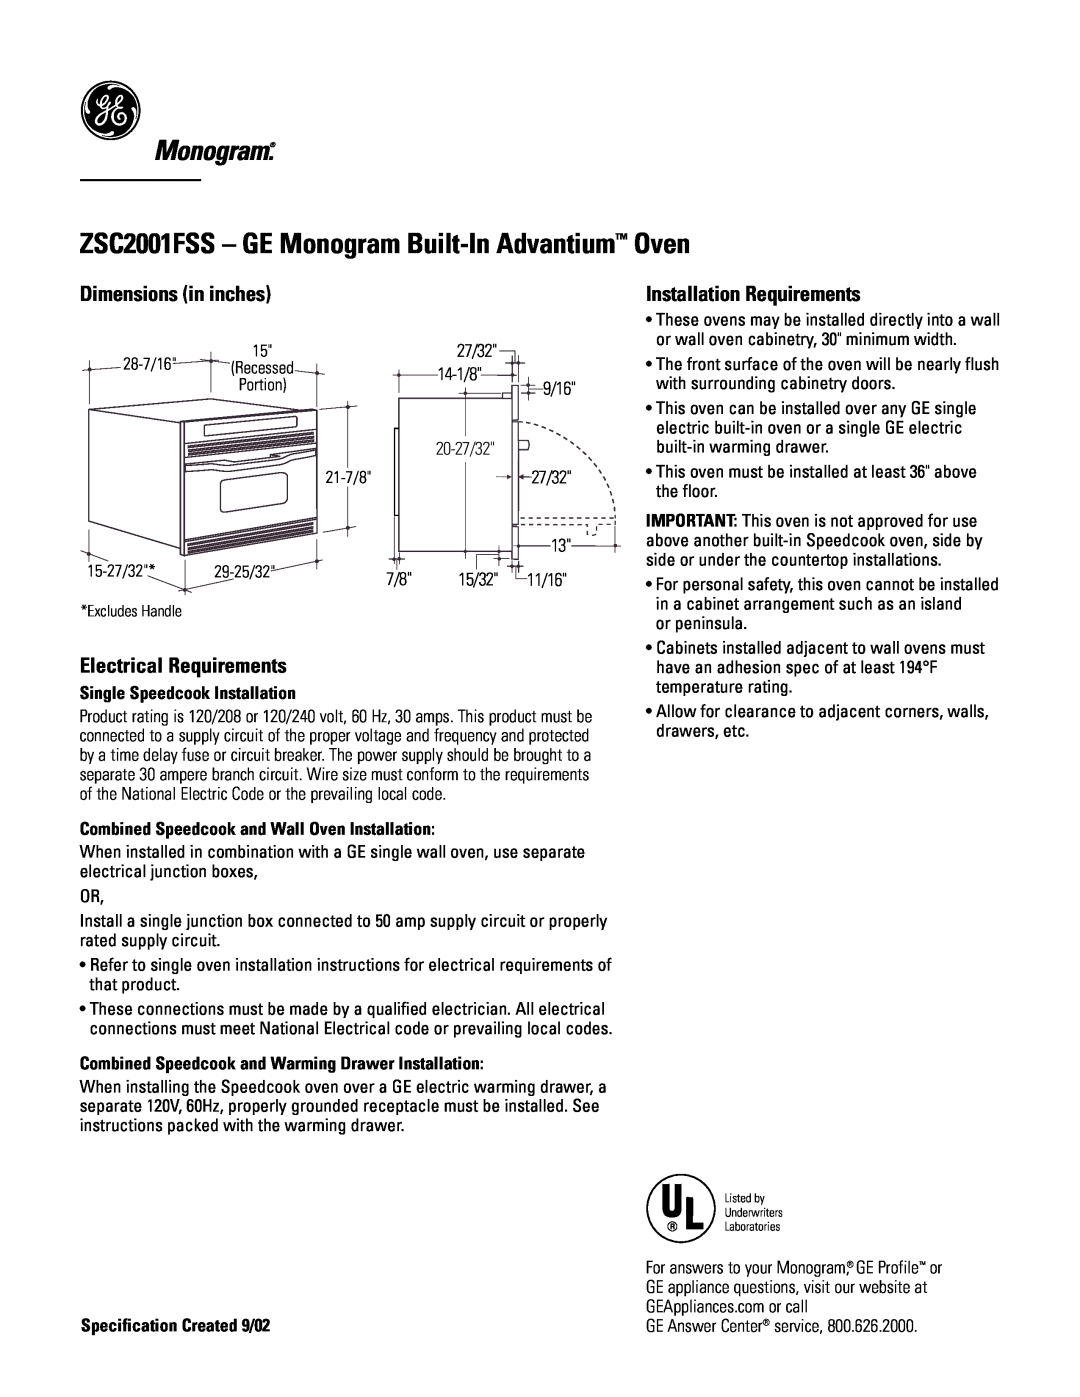 GE Monogram dimensions ZSC2001FSS - GE Monogram Built-In Advantium Oven, Dimensions in inches, Electrical Requirements 